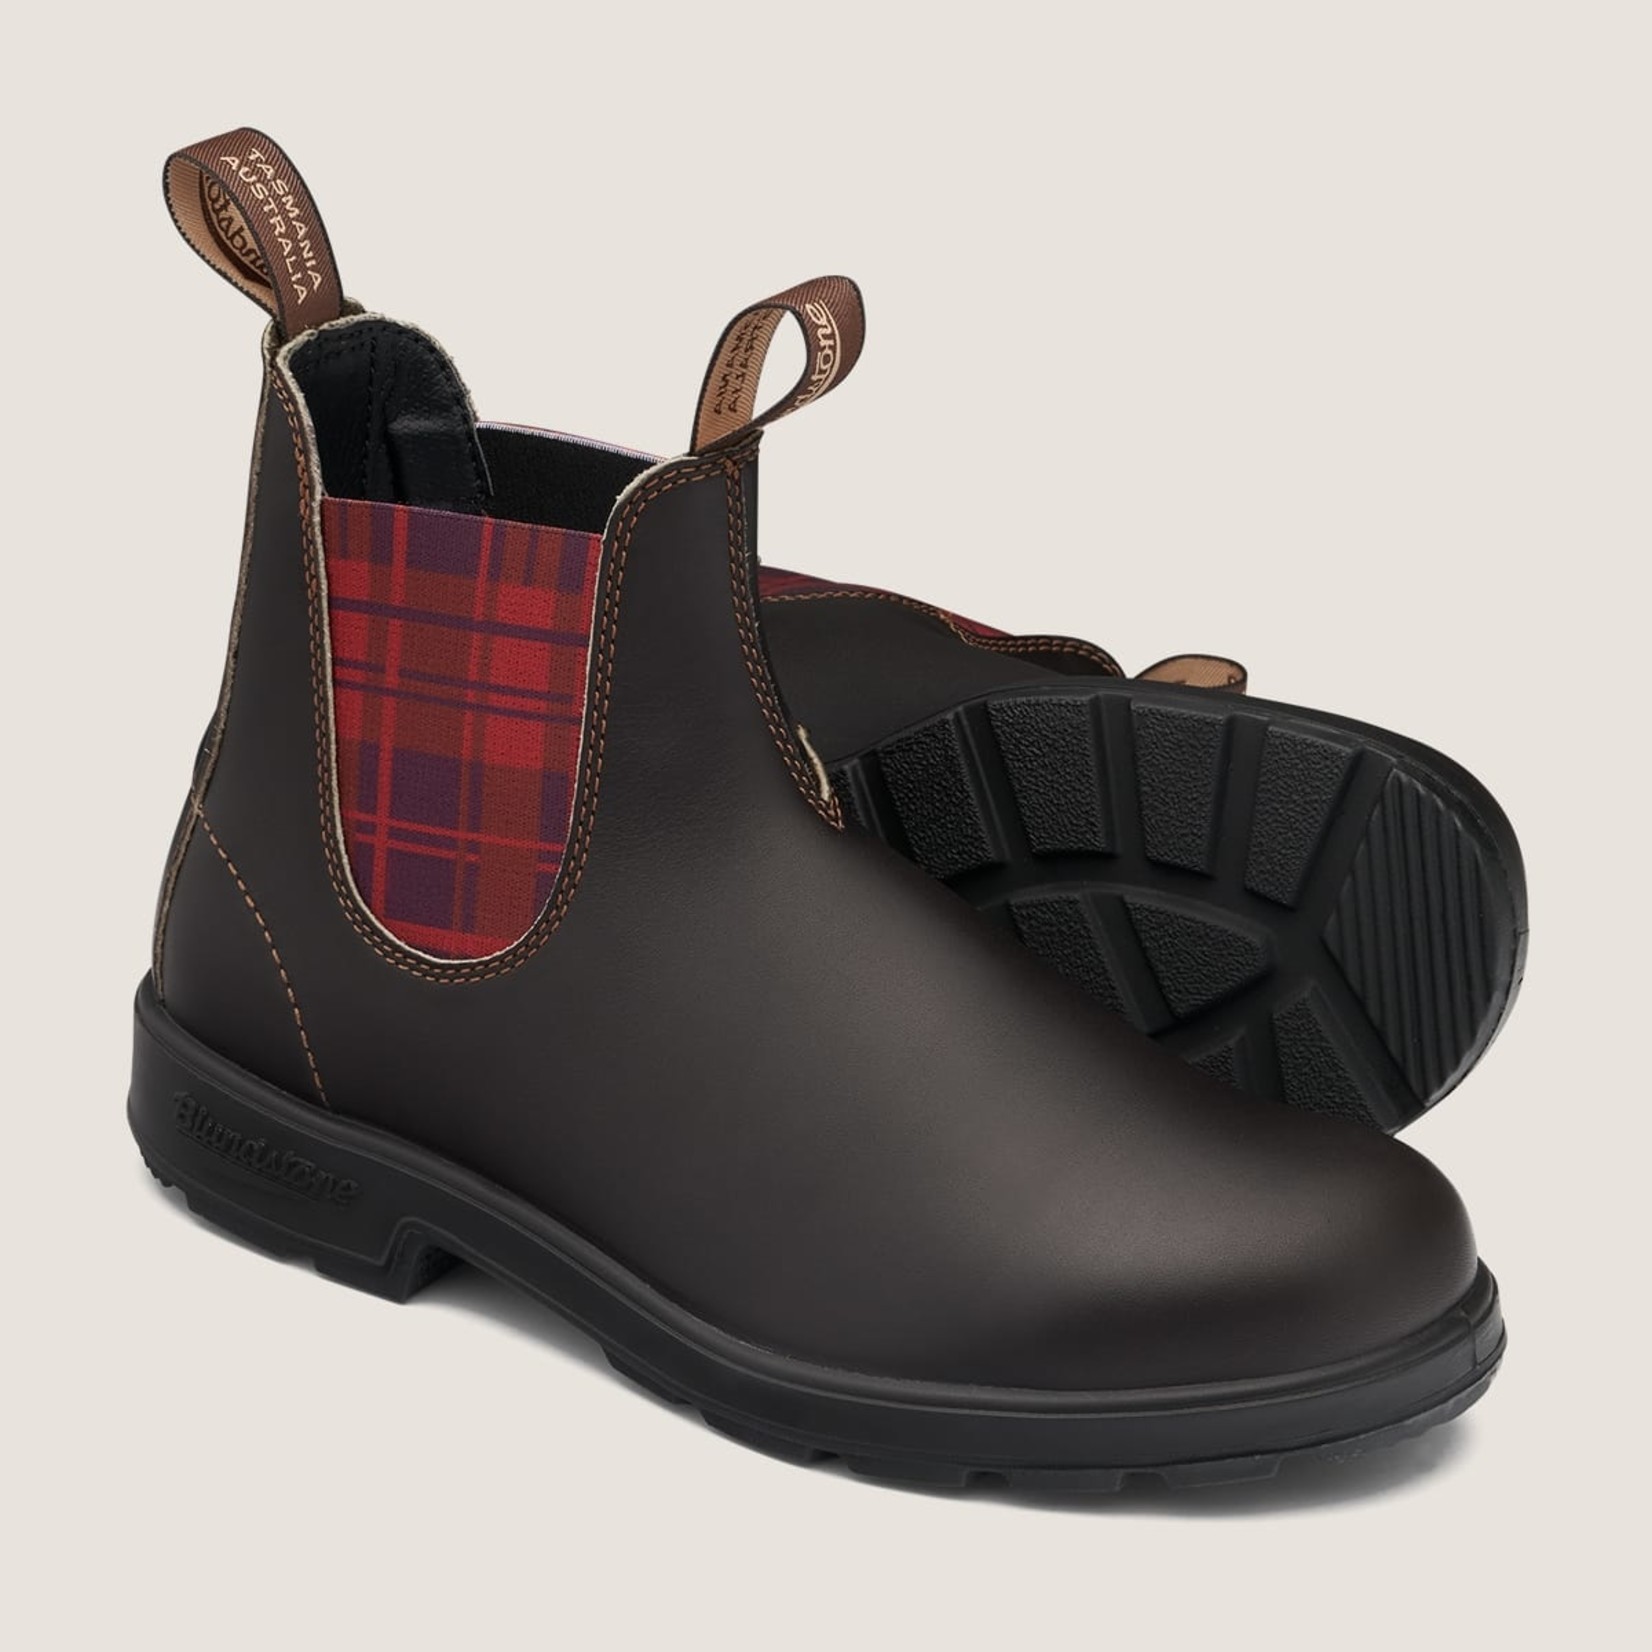 Blundstone 2100 Stout Brown with Burgandy